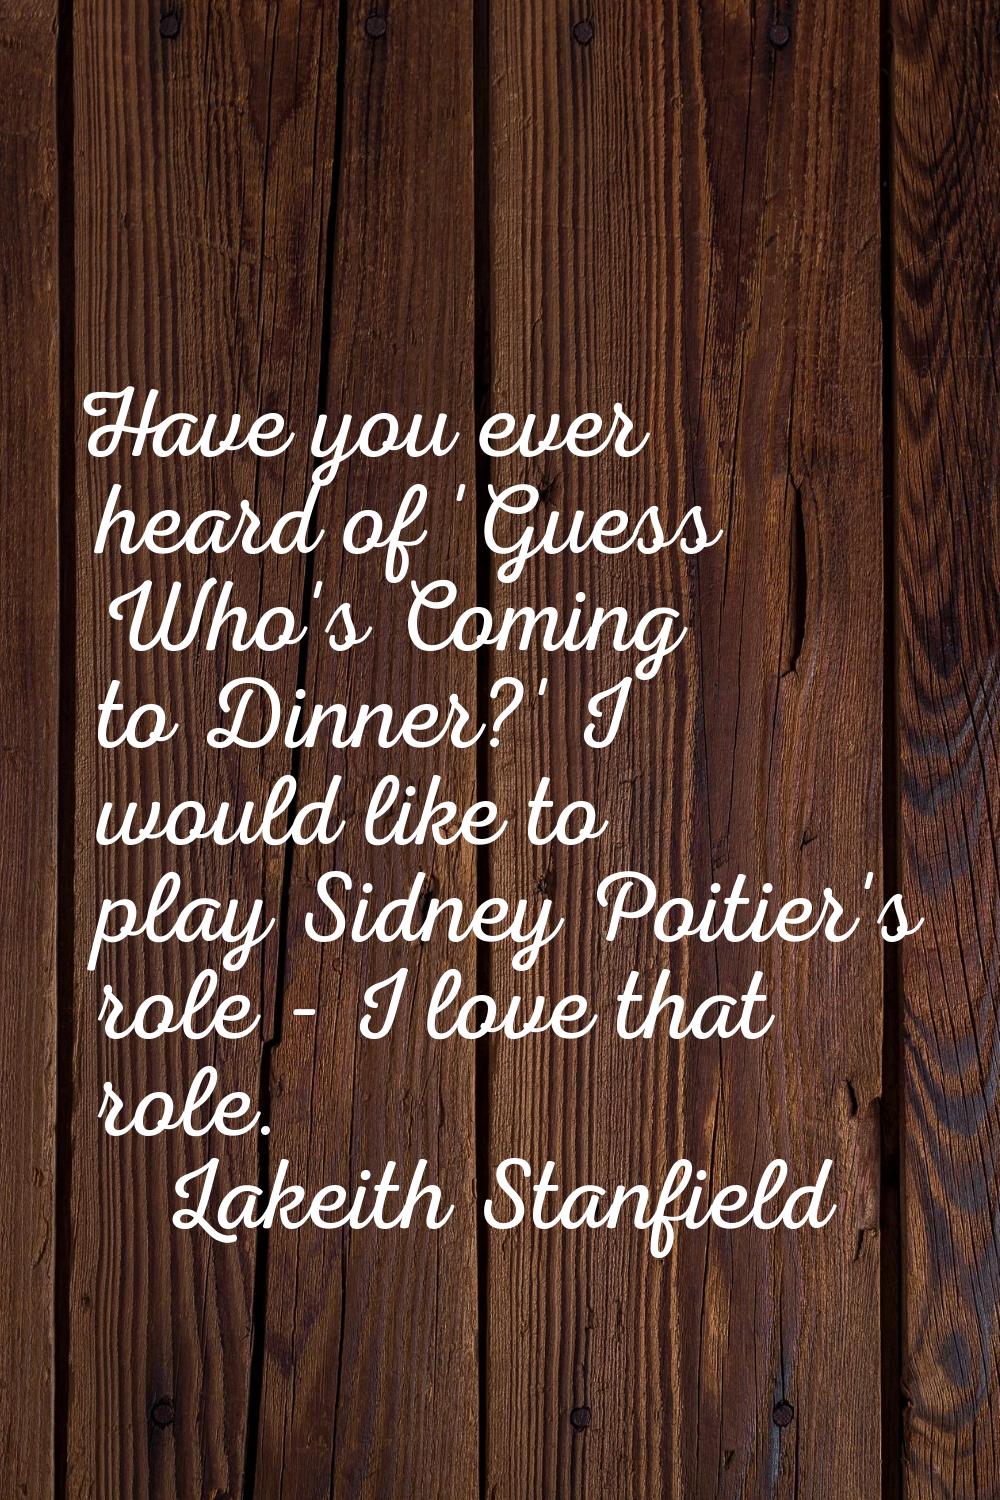 Have you ever heard of 'Guess Who's Coming to Dinner?' I would like to play Sidney Poitier's role -